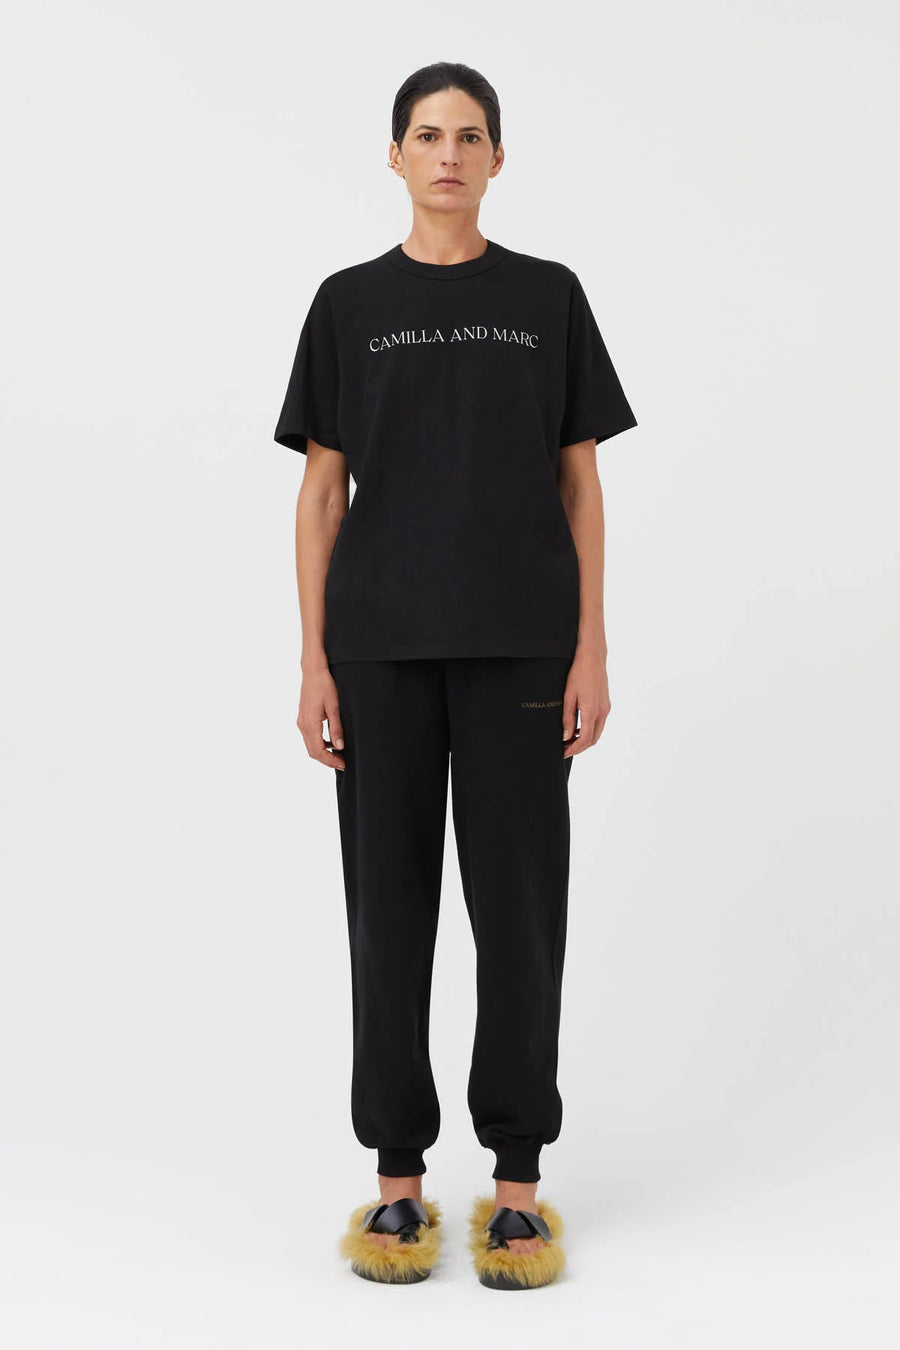 Camilla And Marc Asher Tee Black Stone